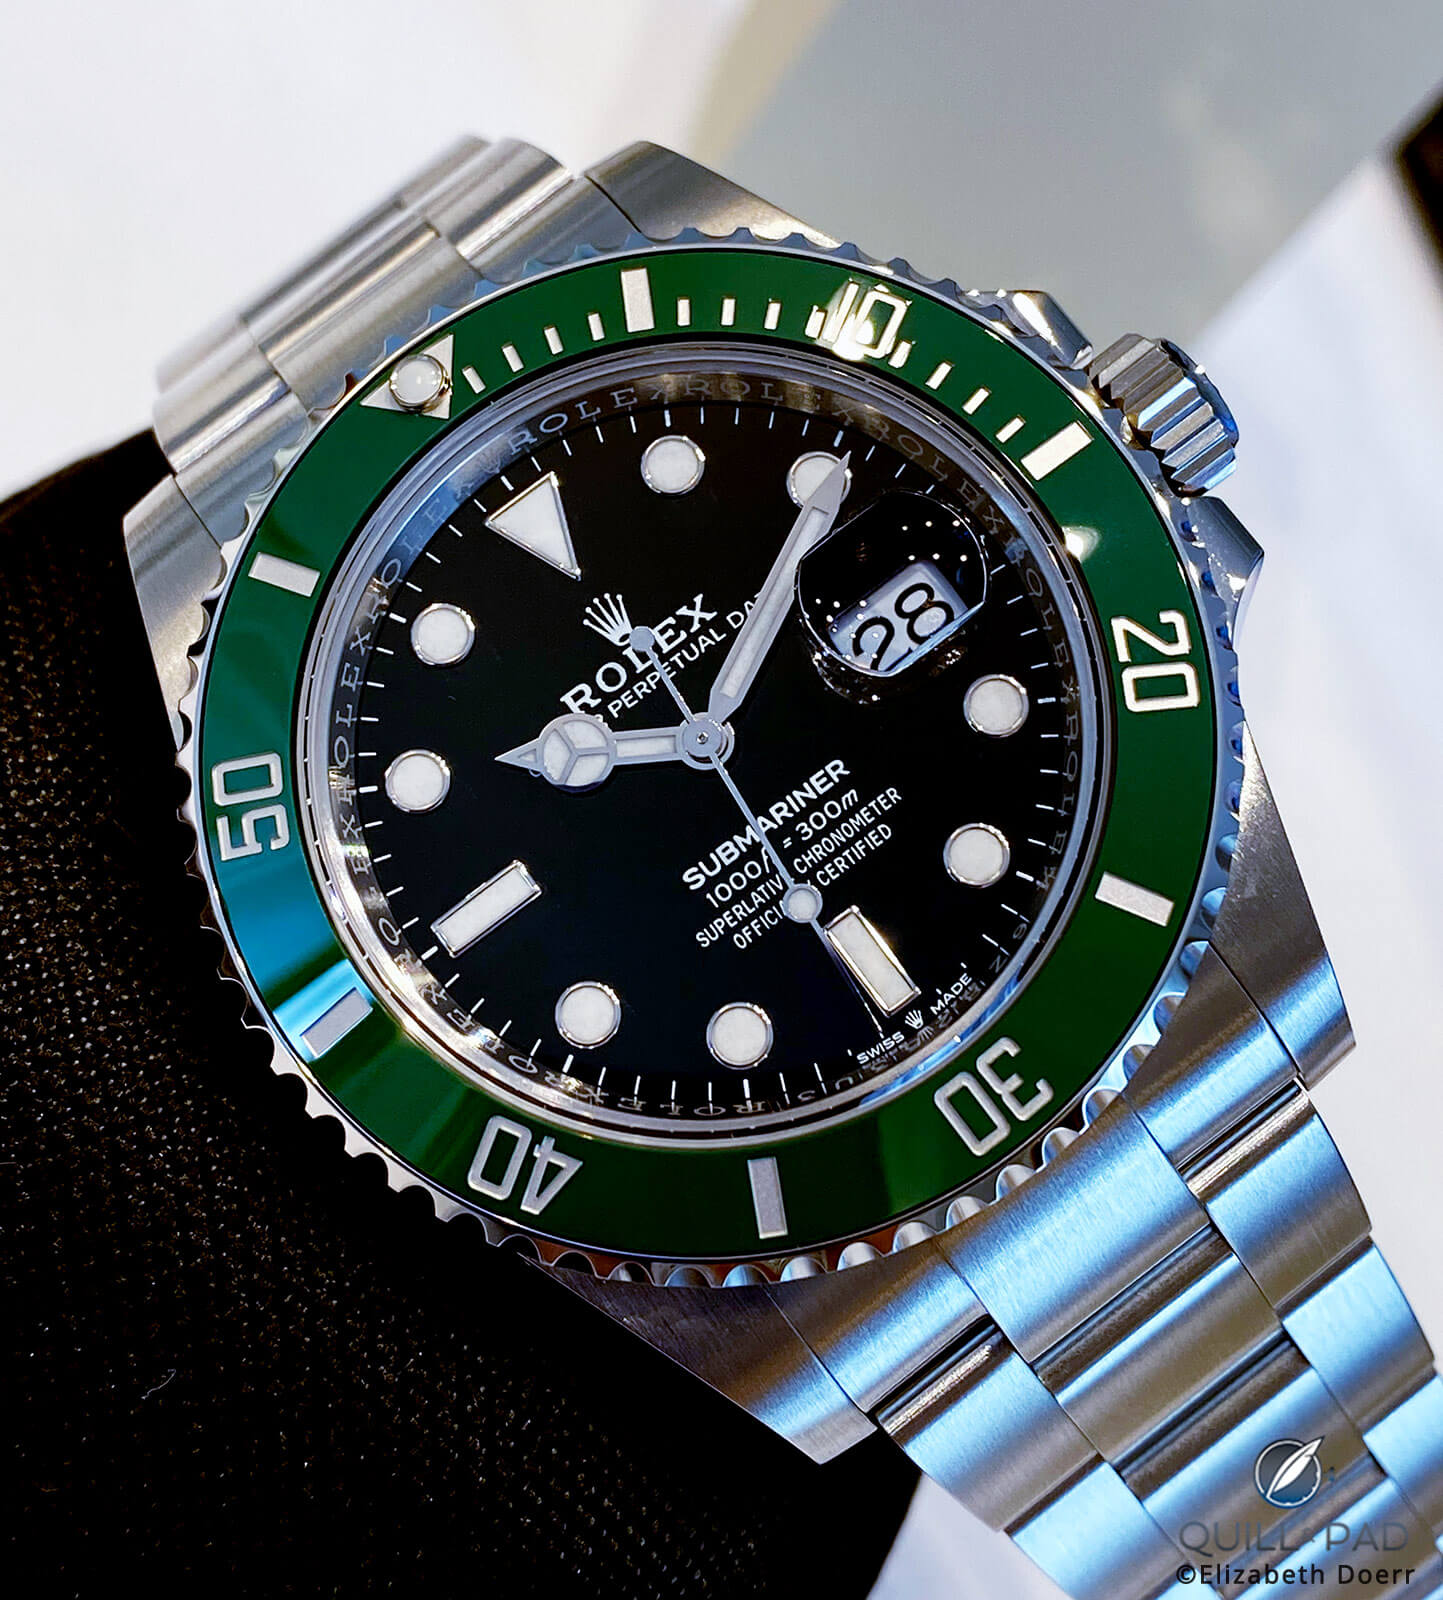 Tidlig befolkning gå på pension All 4 New Rolex 2020 Collection Updates Plus One Watch You Might Have  Missed - Quill & Pad